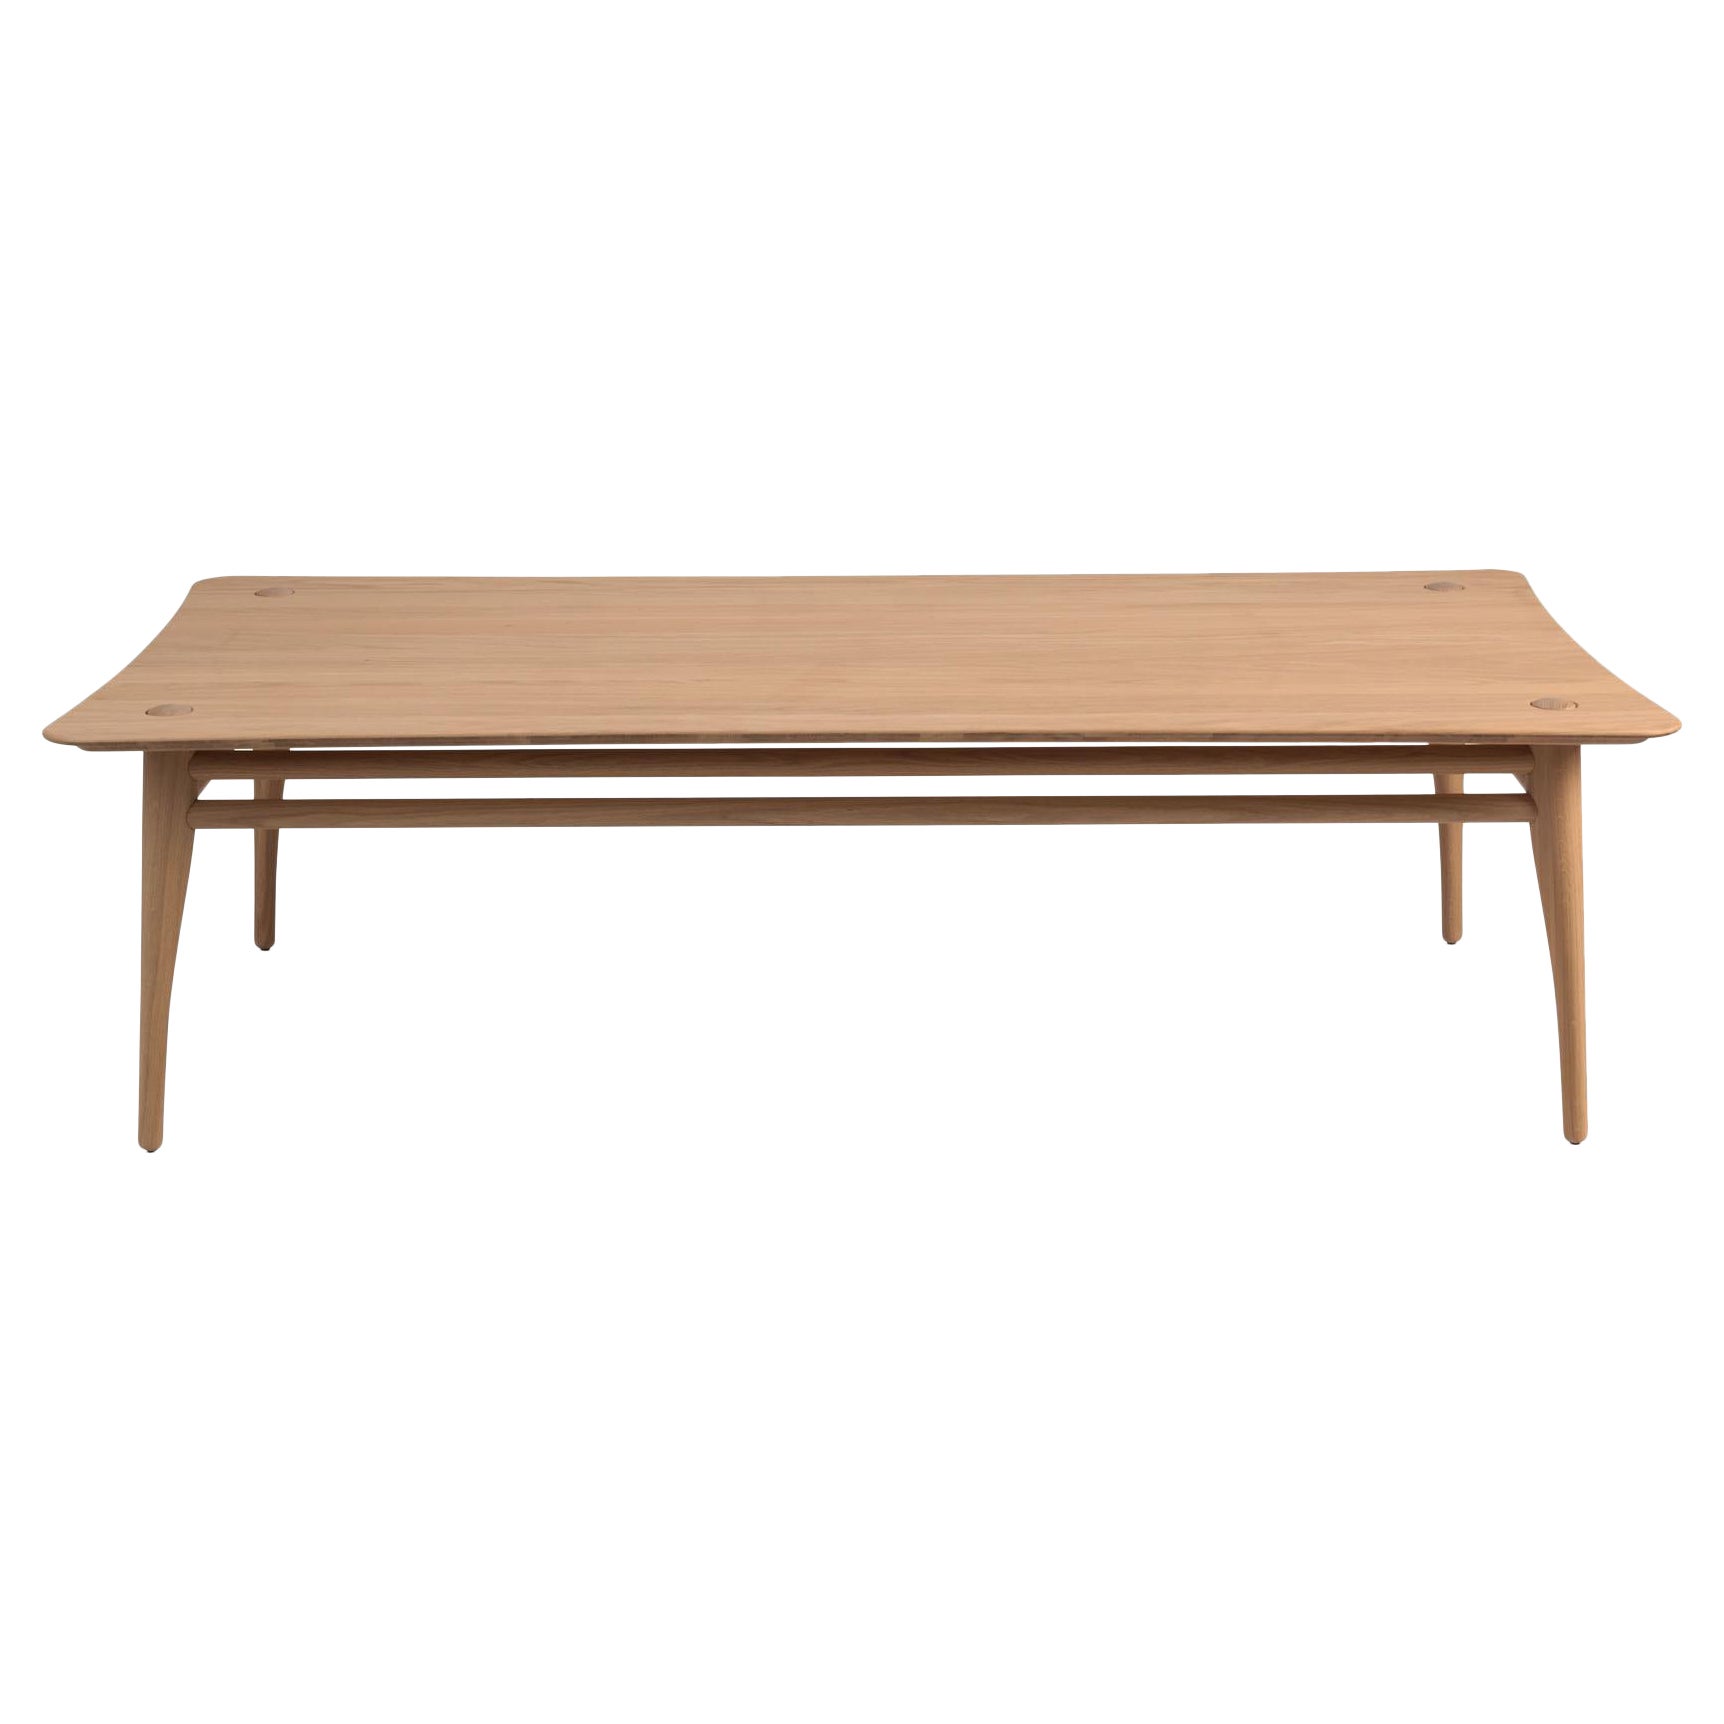 Revised Chilgrove - solid oak coffee table - rectangle160x80cm For Sale